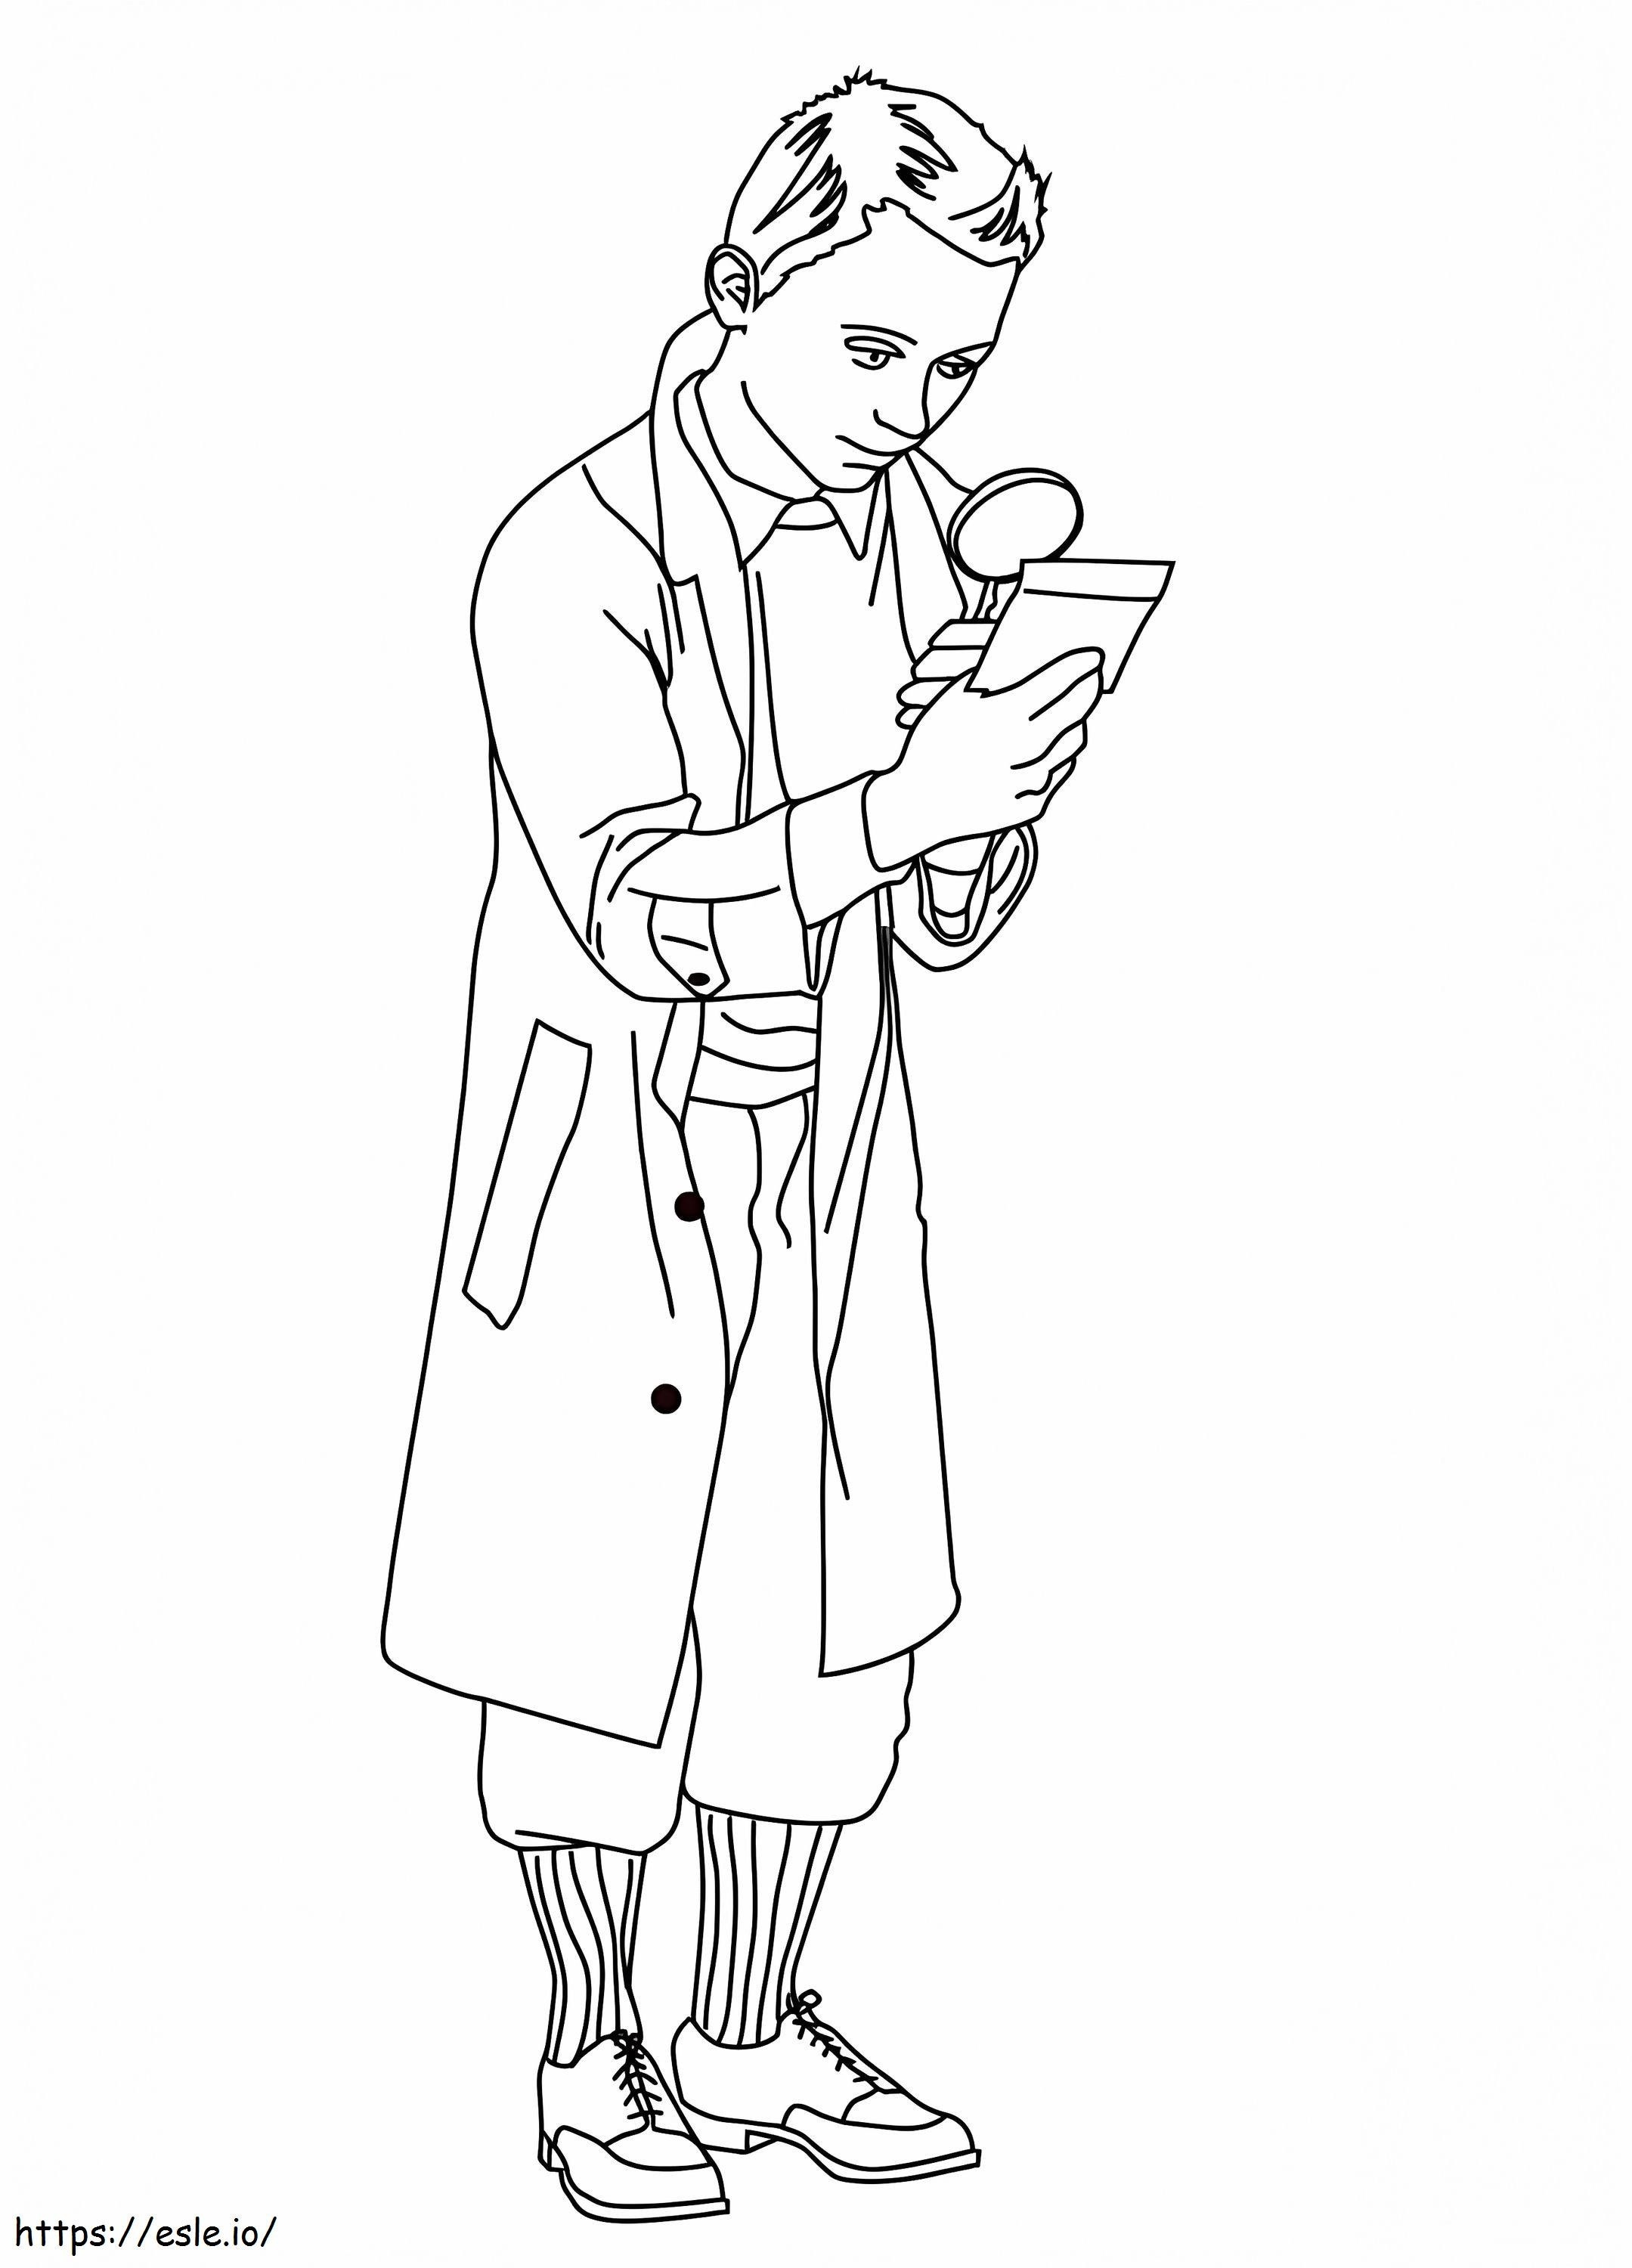 Tintin Looking For Clues coloring page